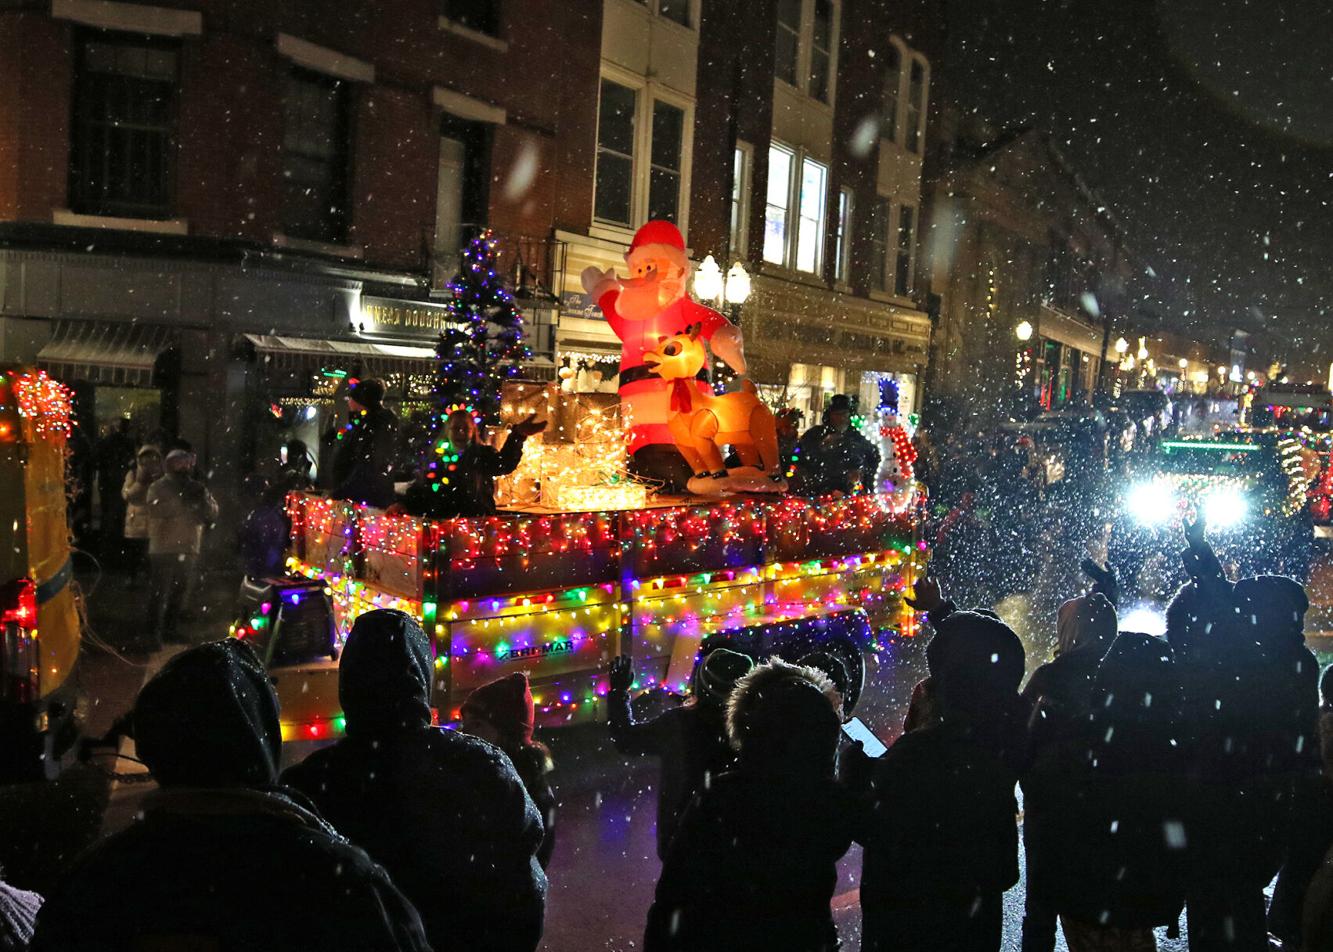 This year’s Westerly Light Parade will be held in downtown Westerly on